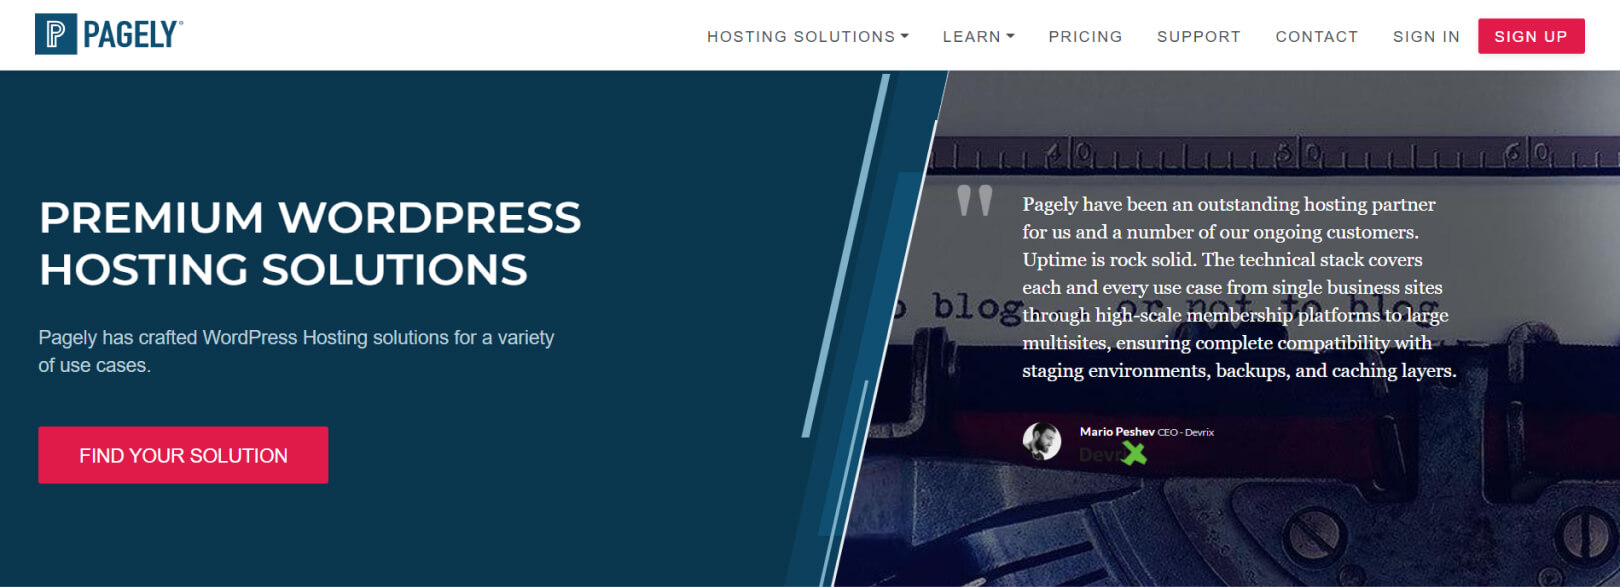 Pagely hosting provider